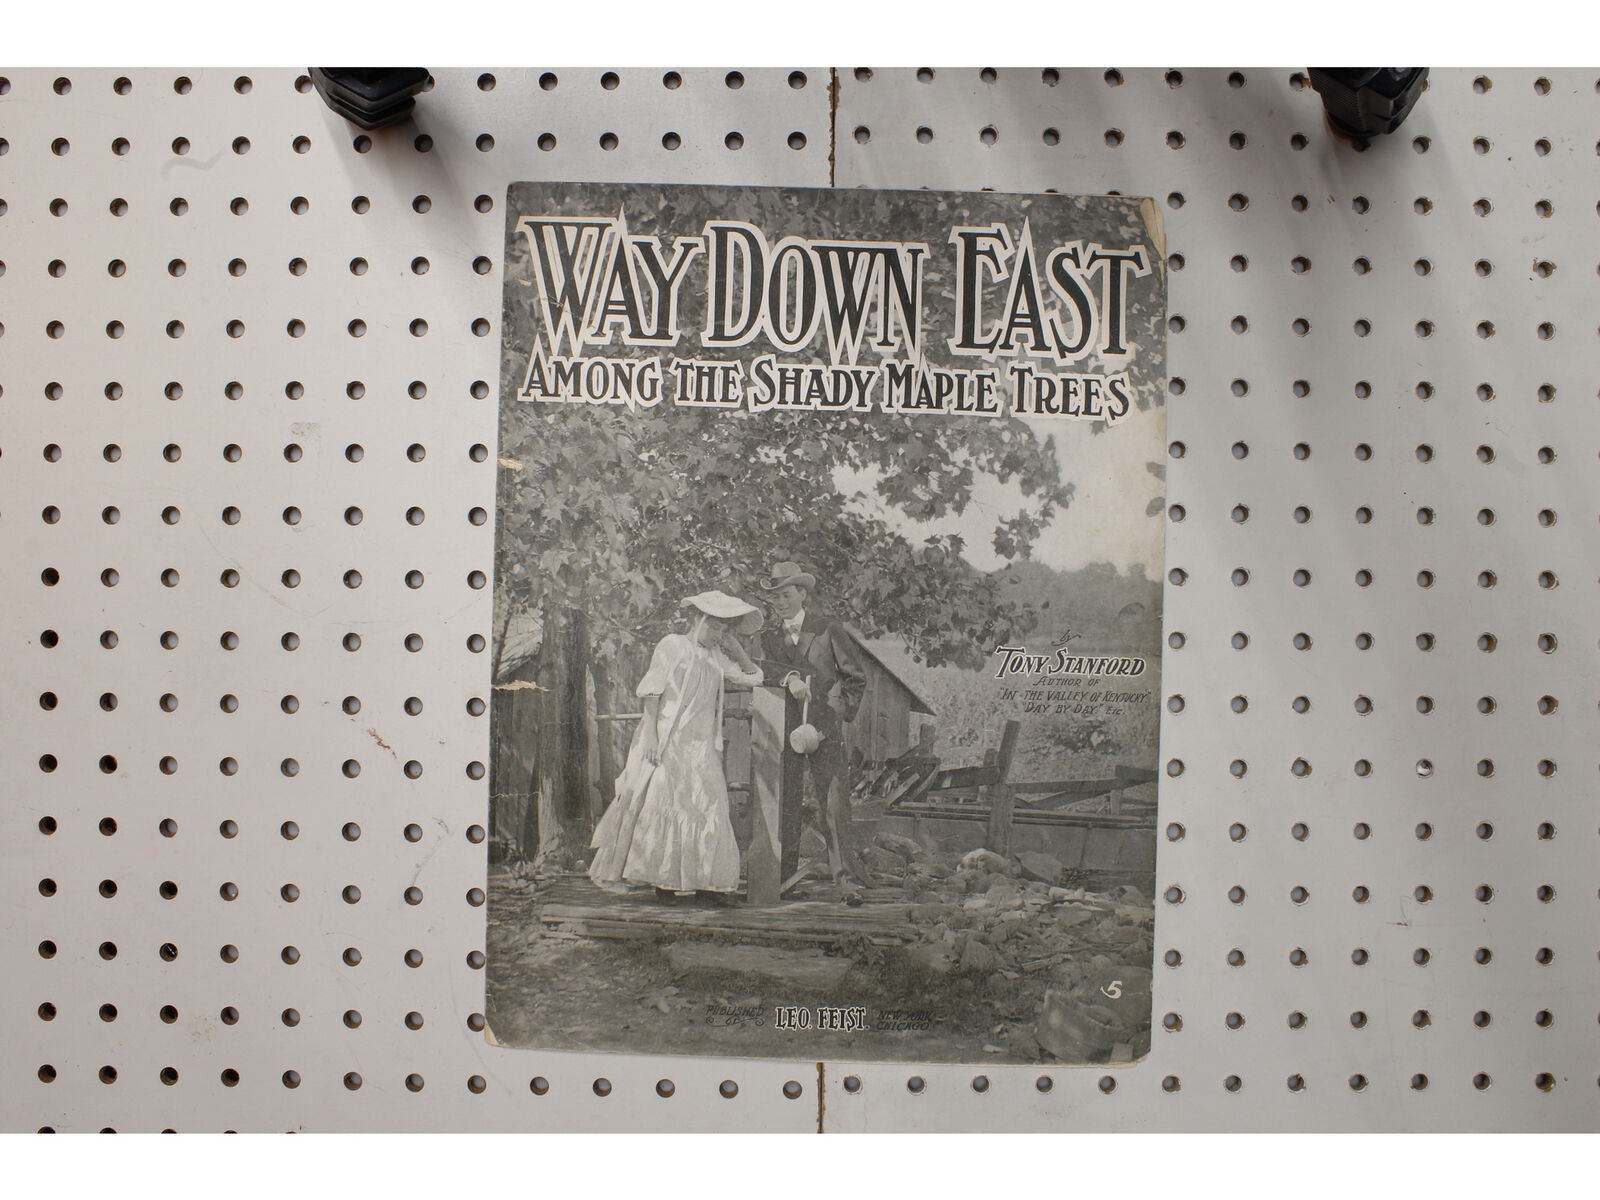 1904 - Way down East among the shady maple trees - Sheet Music